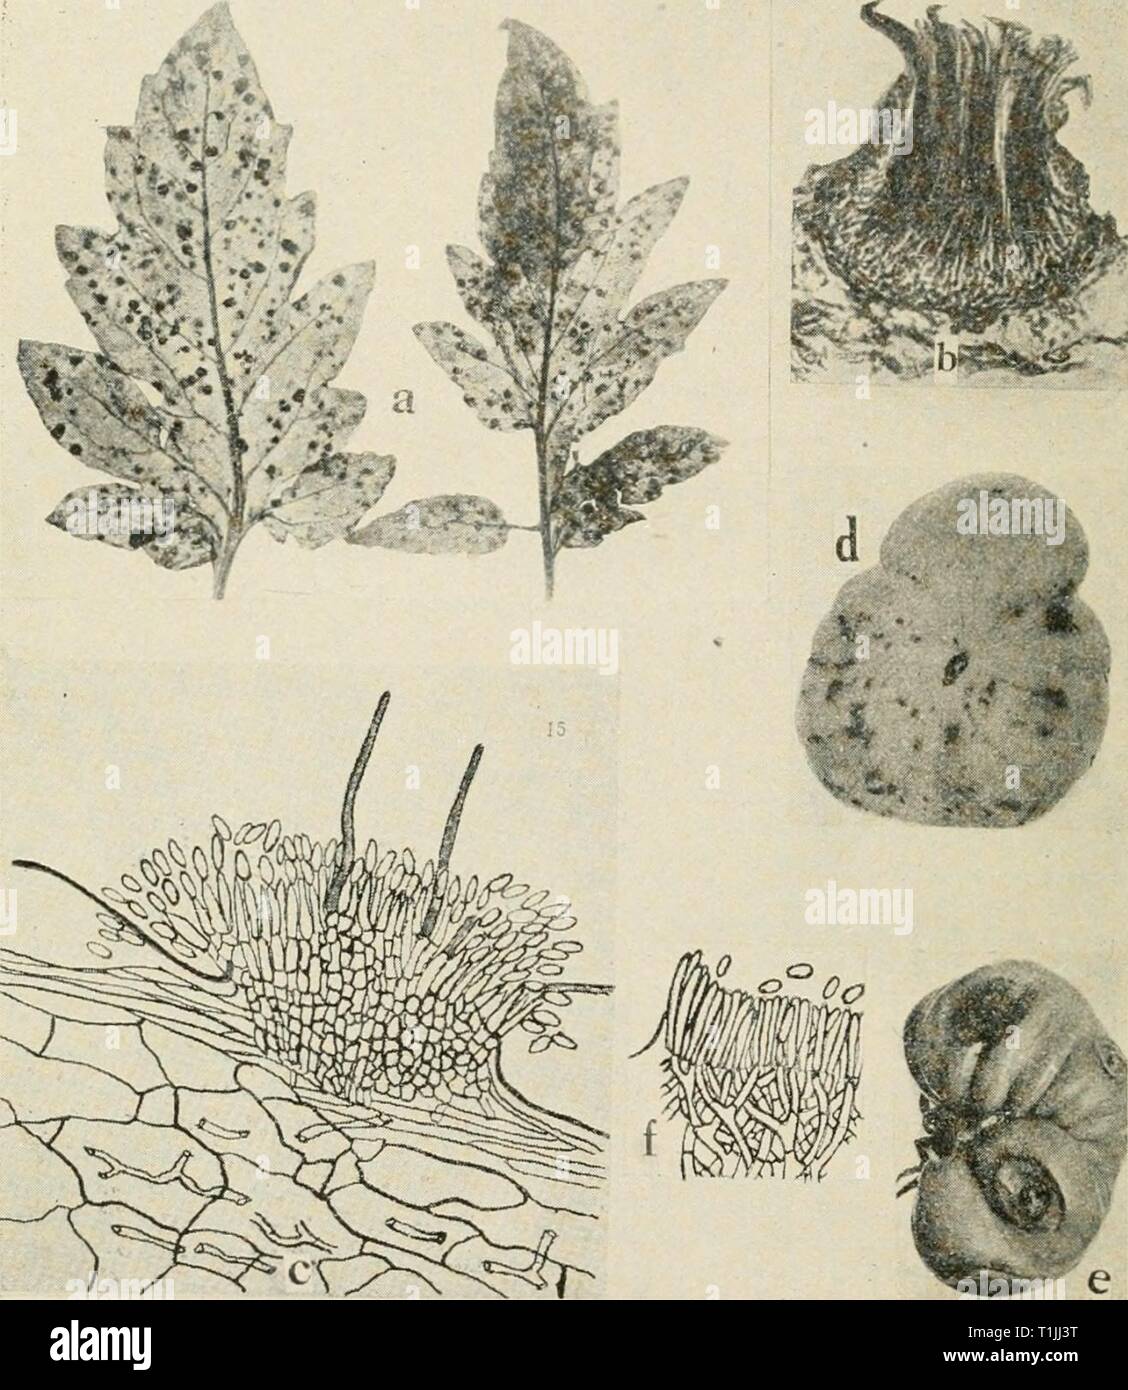 Diseases of truck crops and Diseases of truck crops and their control  diseasesoftruckc00taub Year: 1918  .â *r*'&gt;*lX    Fig. 66. Tomato Diseases. a. Septoria leaf spot, b. section through a pycnidium of Seploria lycopersiii (after Levin), c. section through acervulus of Collelolrichum phoinnidfs (after Venus Pool), d. and e. Melanconium rot. /. section through an acervulus of the Melan- conium fungus (d. to/, after Tisdale). Stock Photo